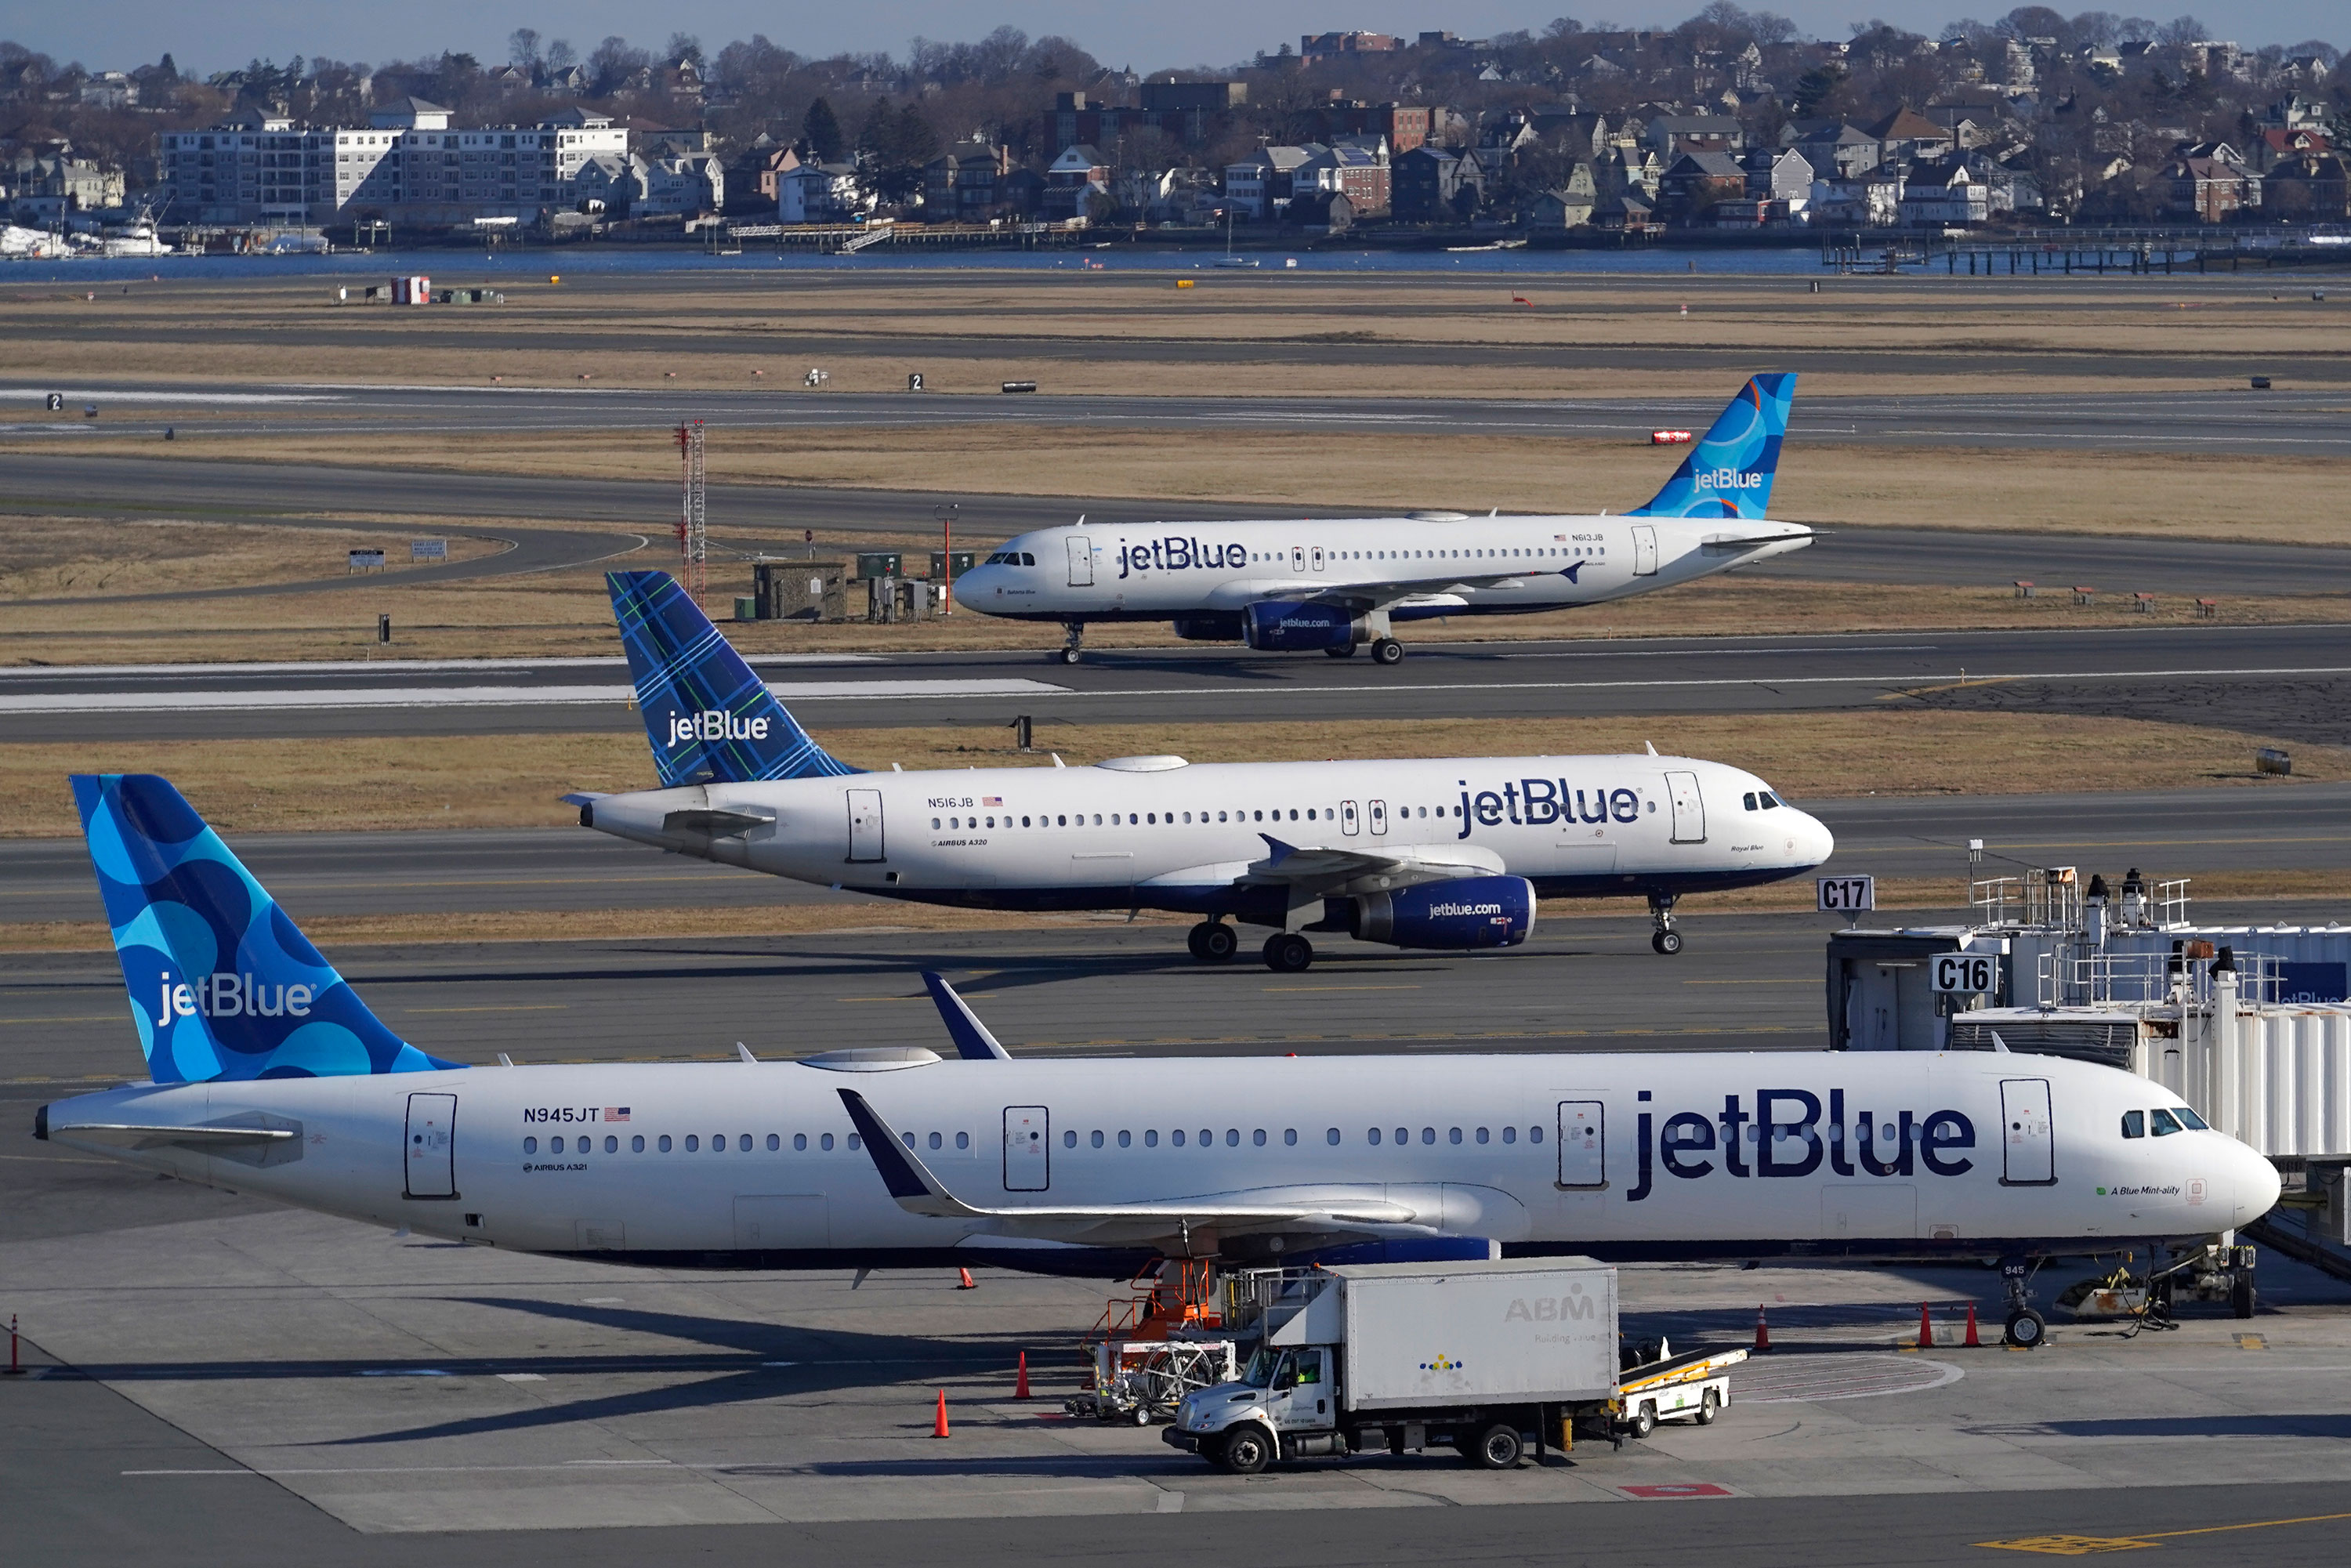 Passenger jets are seen on the tarmac at Logan International Airport in Boston on Wednesday.